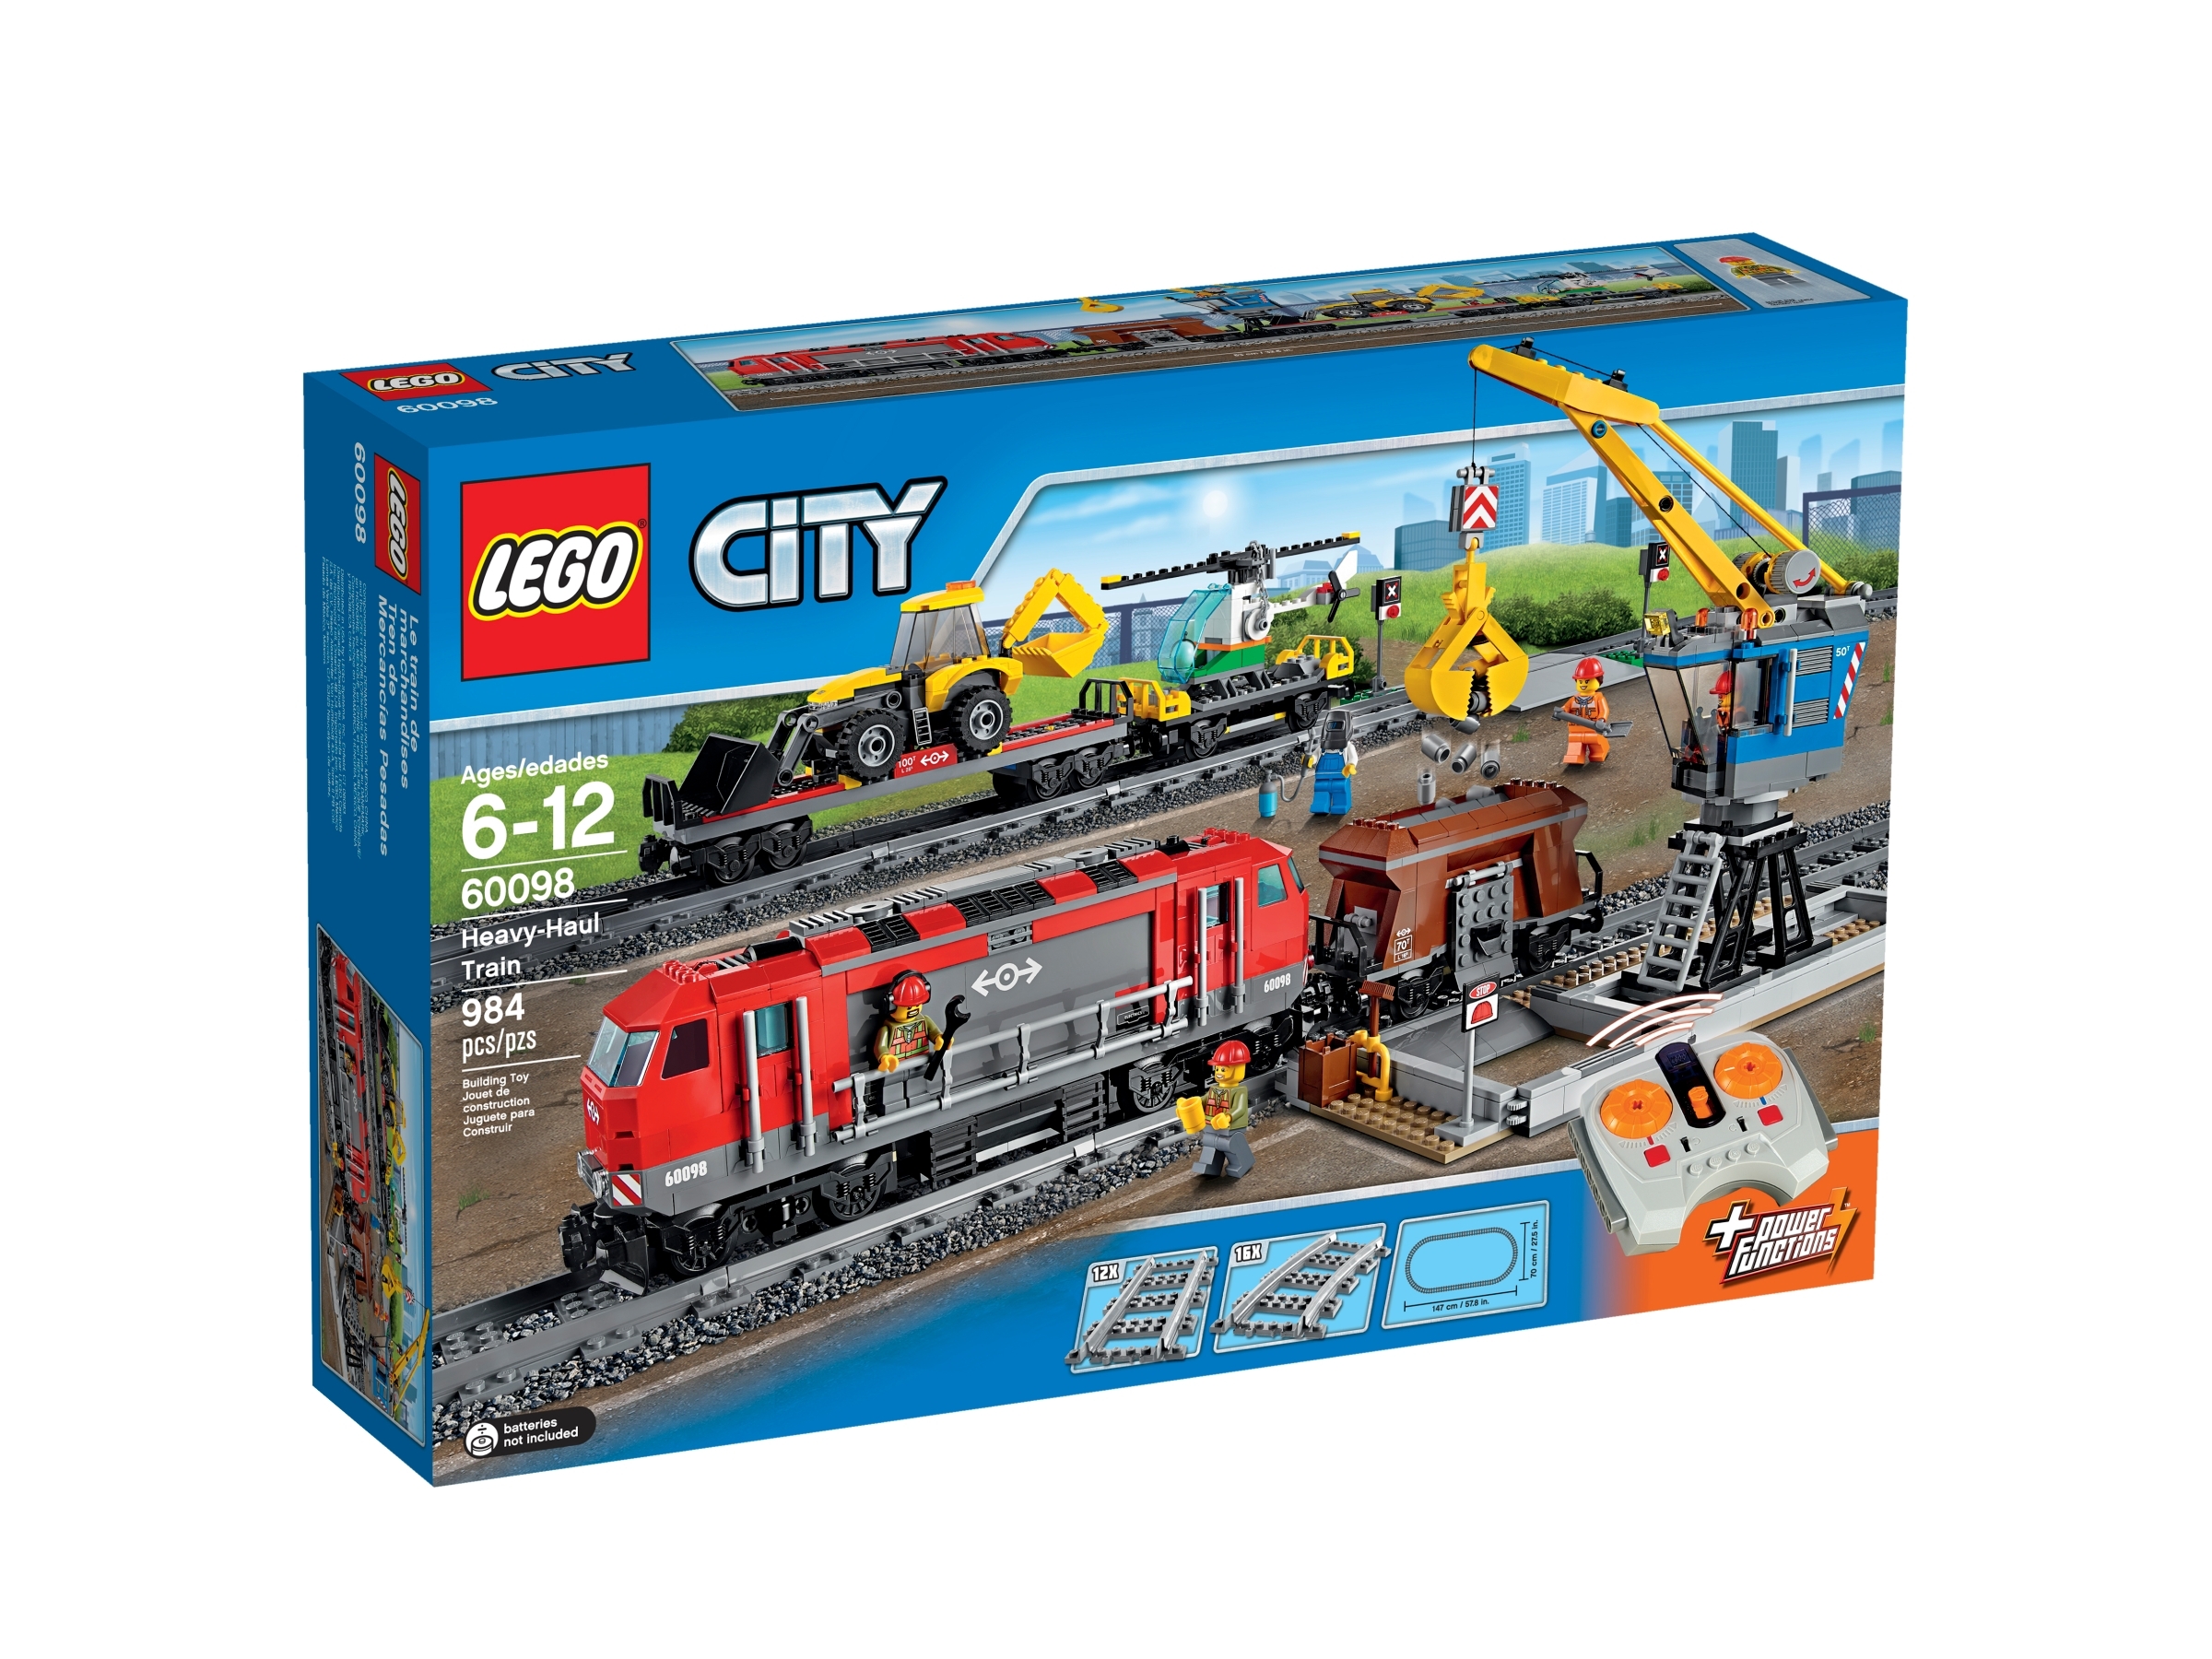  LEGO City Cargo Train 60198 Exclusive Remote Control Train  Building Set with Tracks for Kids, Top Present for Boys and Girls (1226  Pieces) : Toys & Games